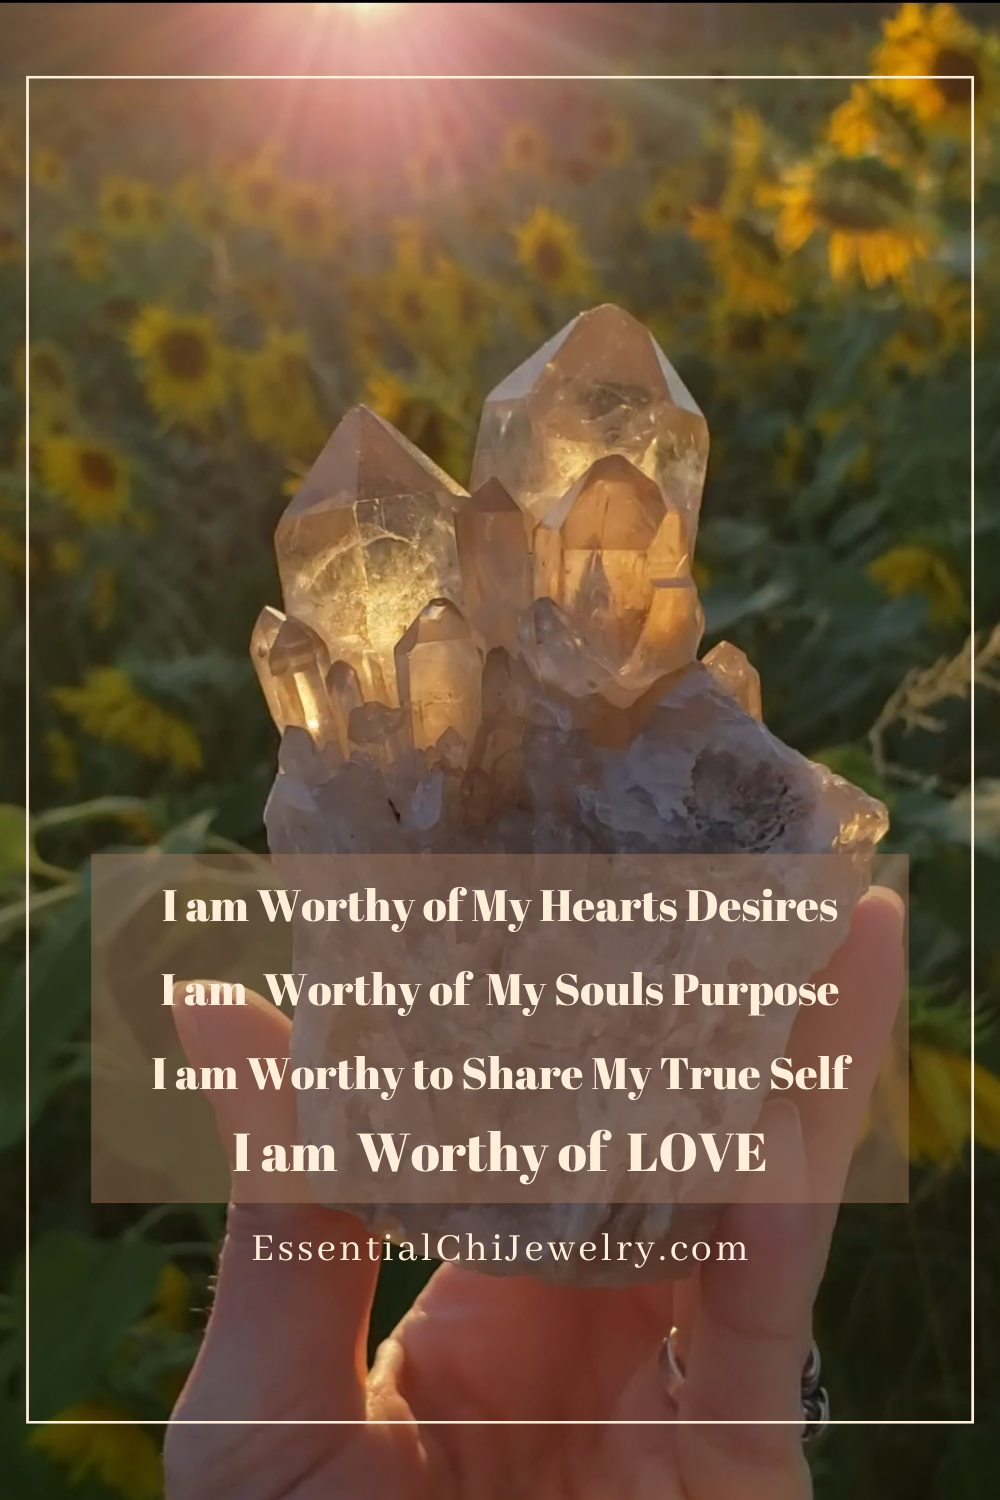 Do you struggle to feel your self worth? Read this blog post to find out how you can gain back your self-worth and see the true identity that you have deep in your soul. Finding your core self takes some time if you don’t already see it, but doing this daily practice can lead you there. Save this pin and share it to help others to get the help they need. Self love practice, self worth quotes, personal development, akashic records questions.